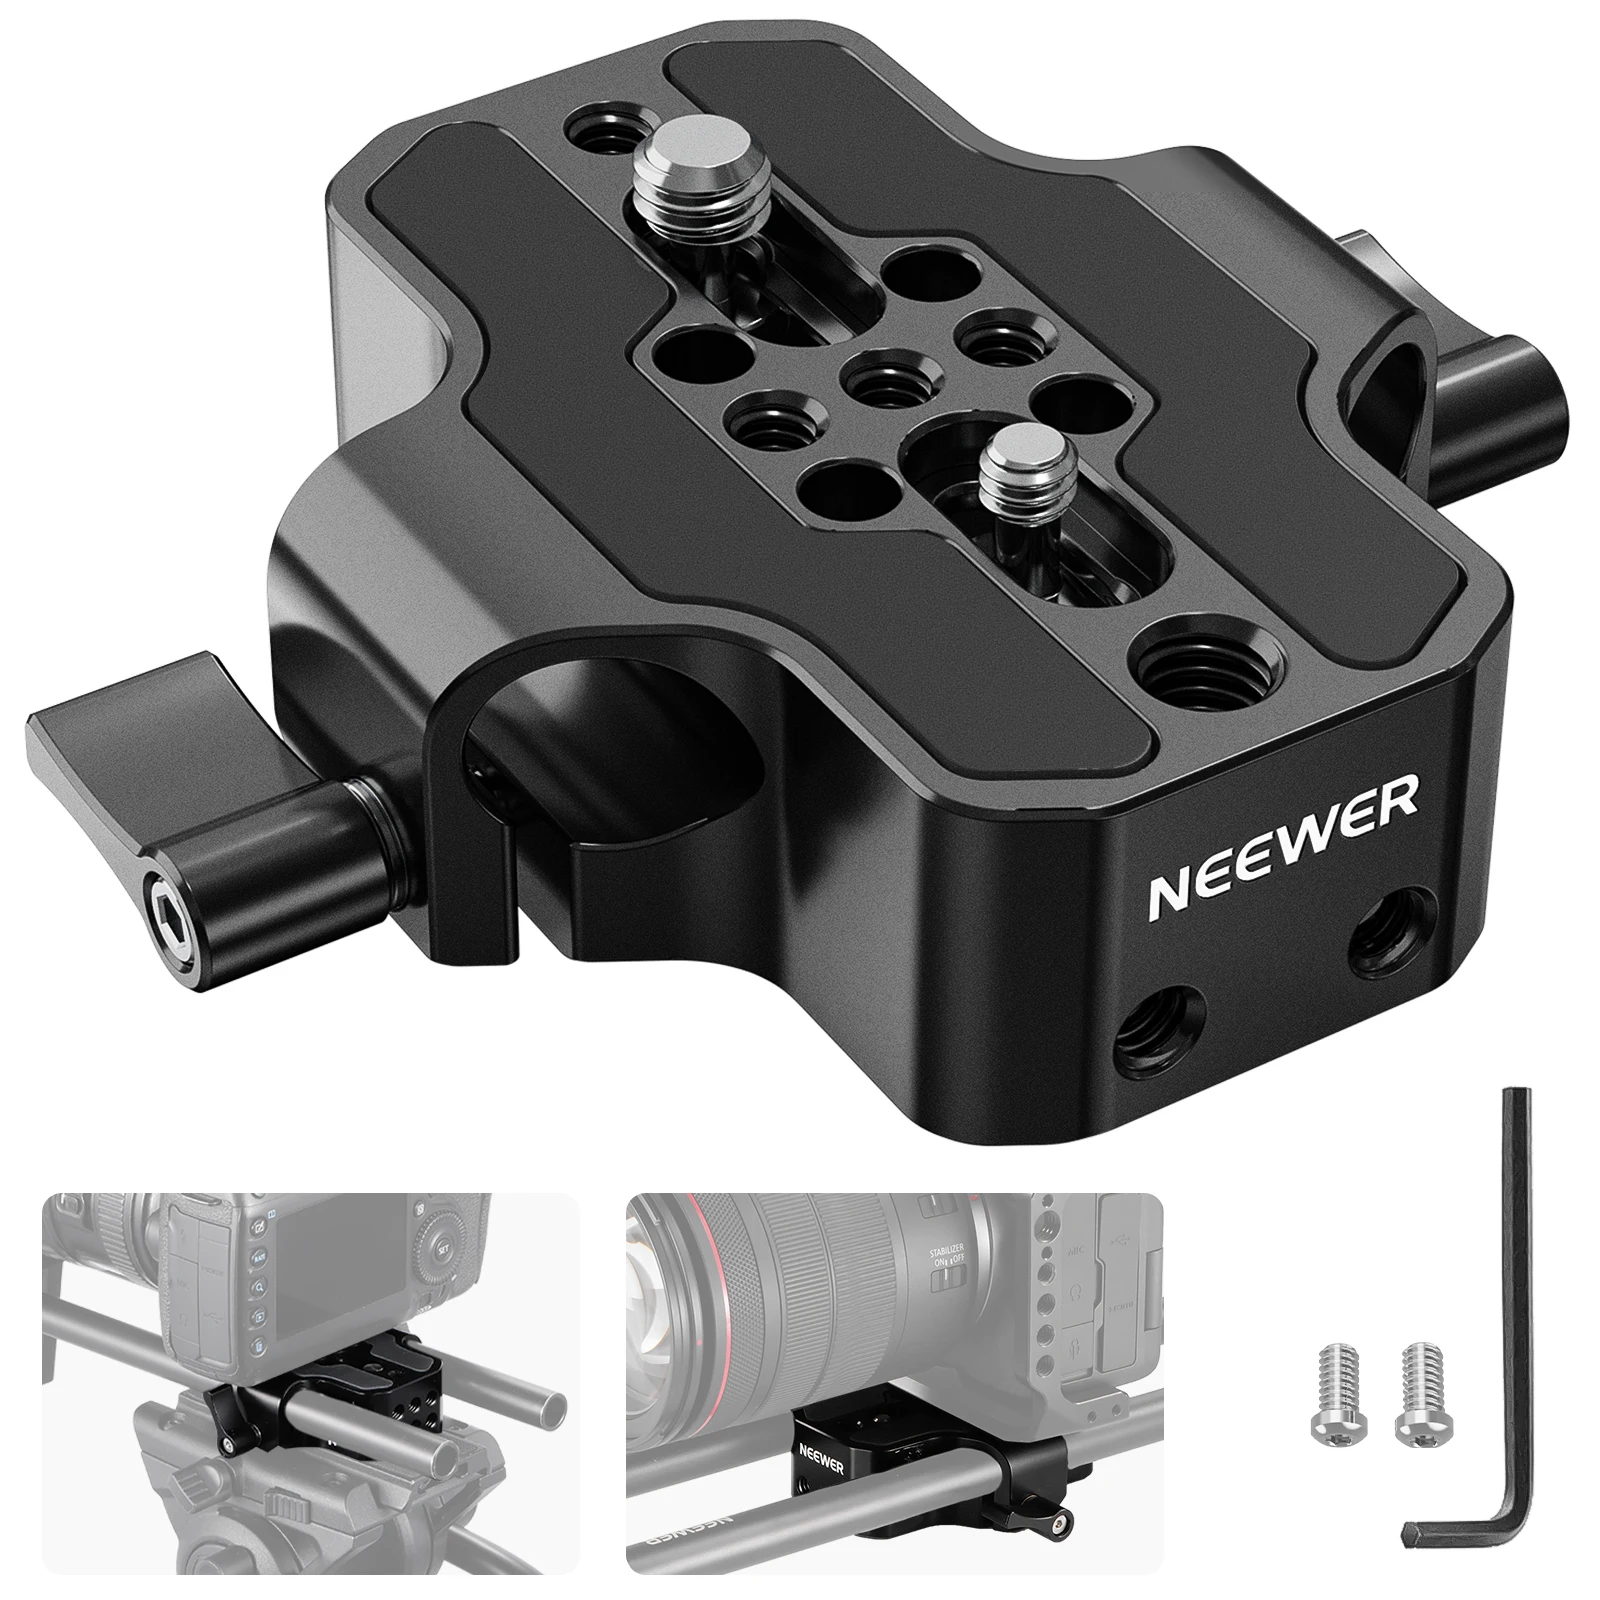 

NEEWER Camera Base Plate with Dual Rod Rail Clamp, 15mm LWS Baseplate for Camera Cage Tripod Shoulder Rig with 1/4" & 3/8"